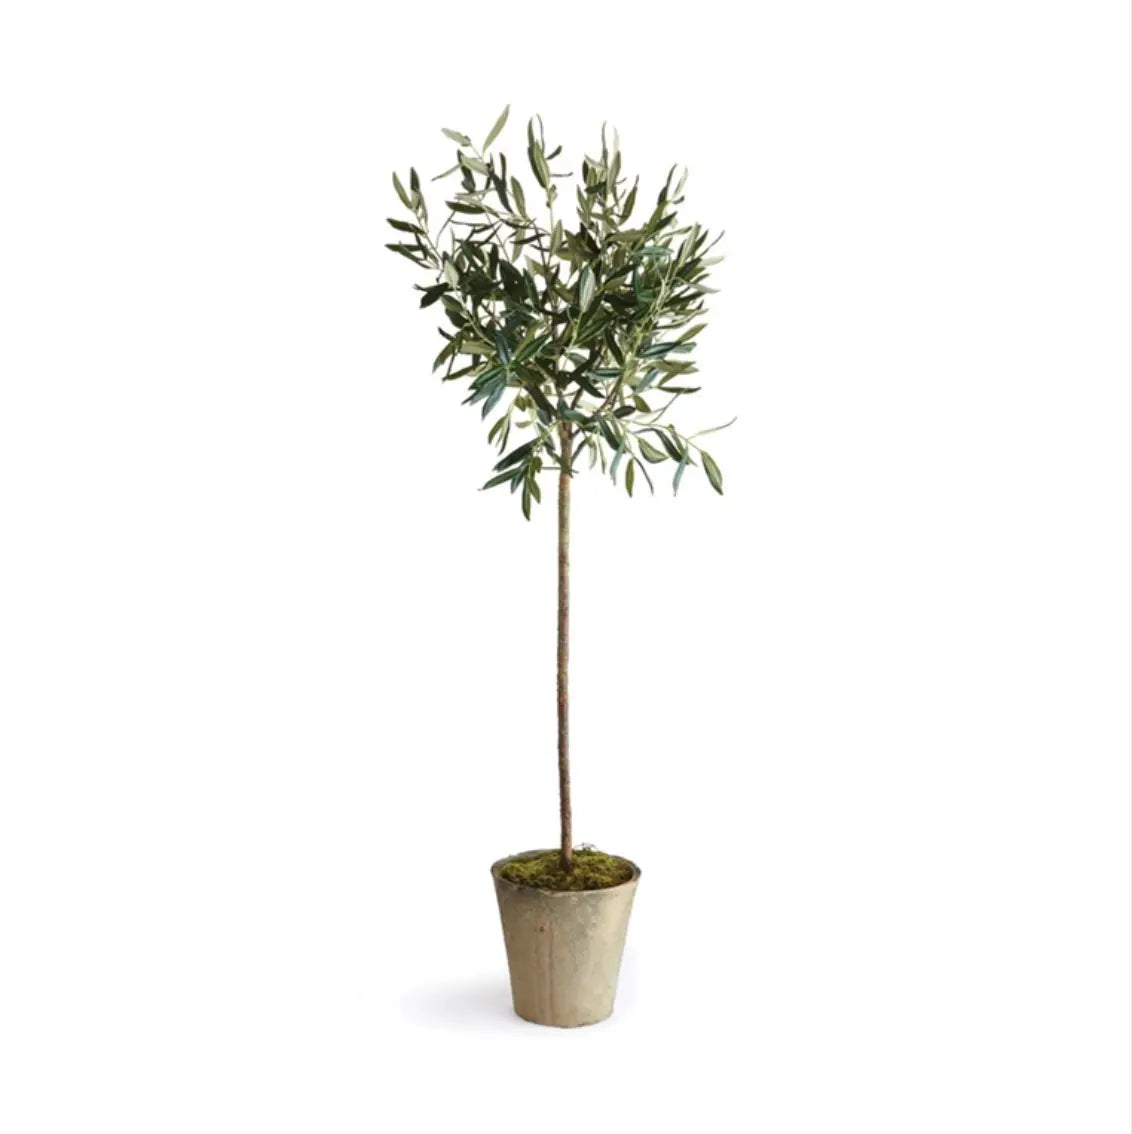 Home Smith Potted Olive Trees Napa Home and Garden Stems, Blooms & Branches